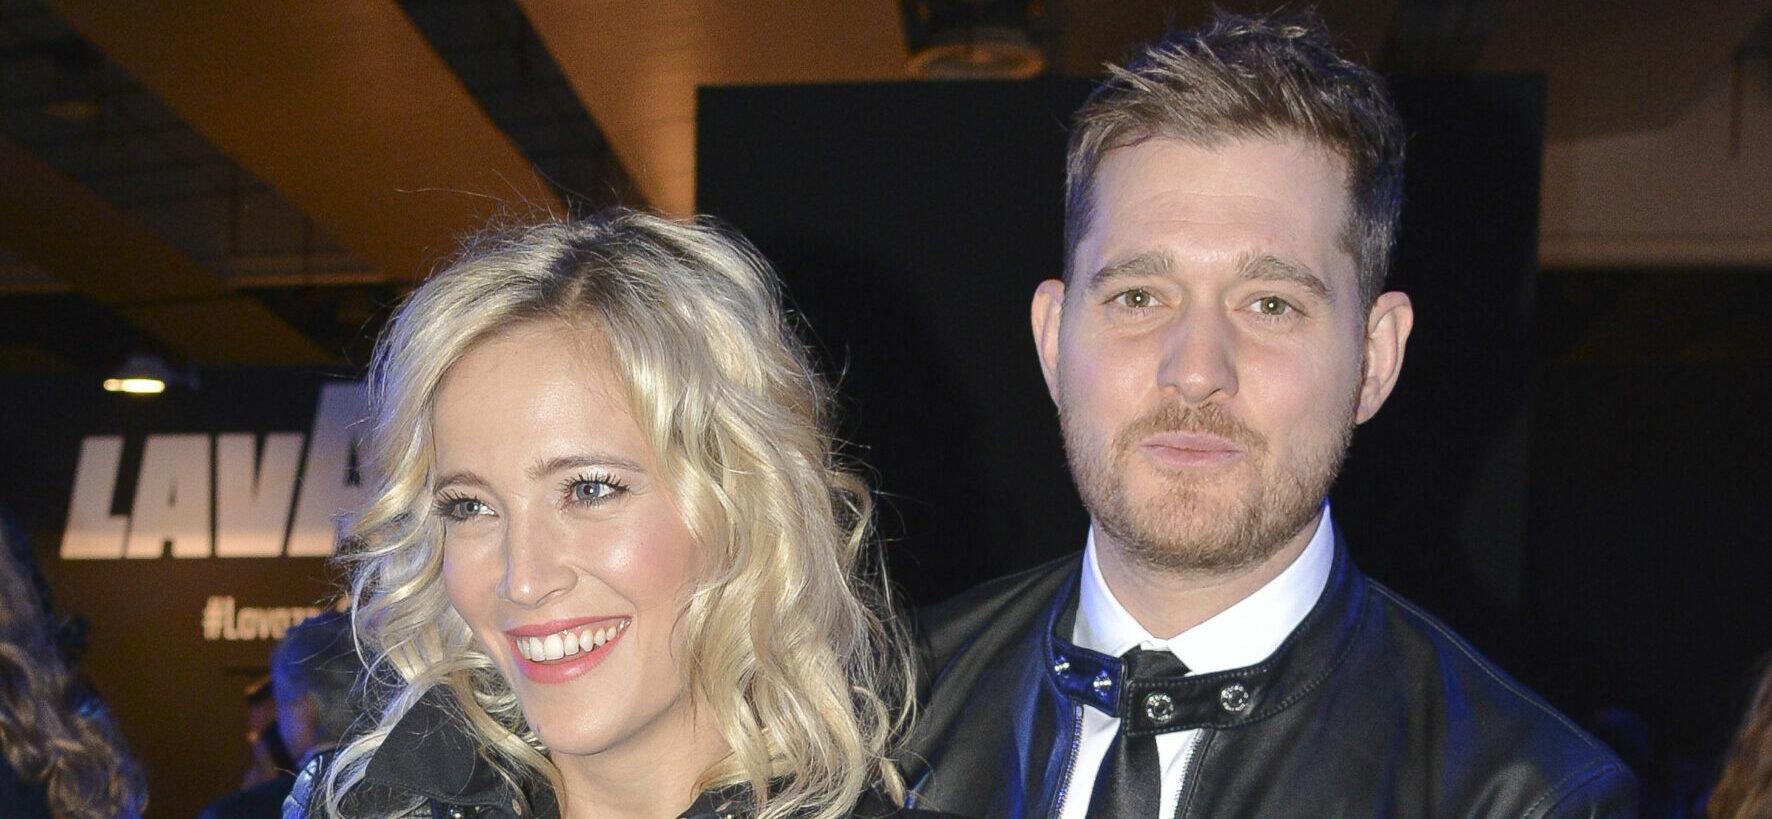 Micheal Bublé And Wife Luisana Reveal Fourth Pregnancy In Music Video